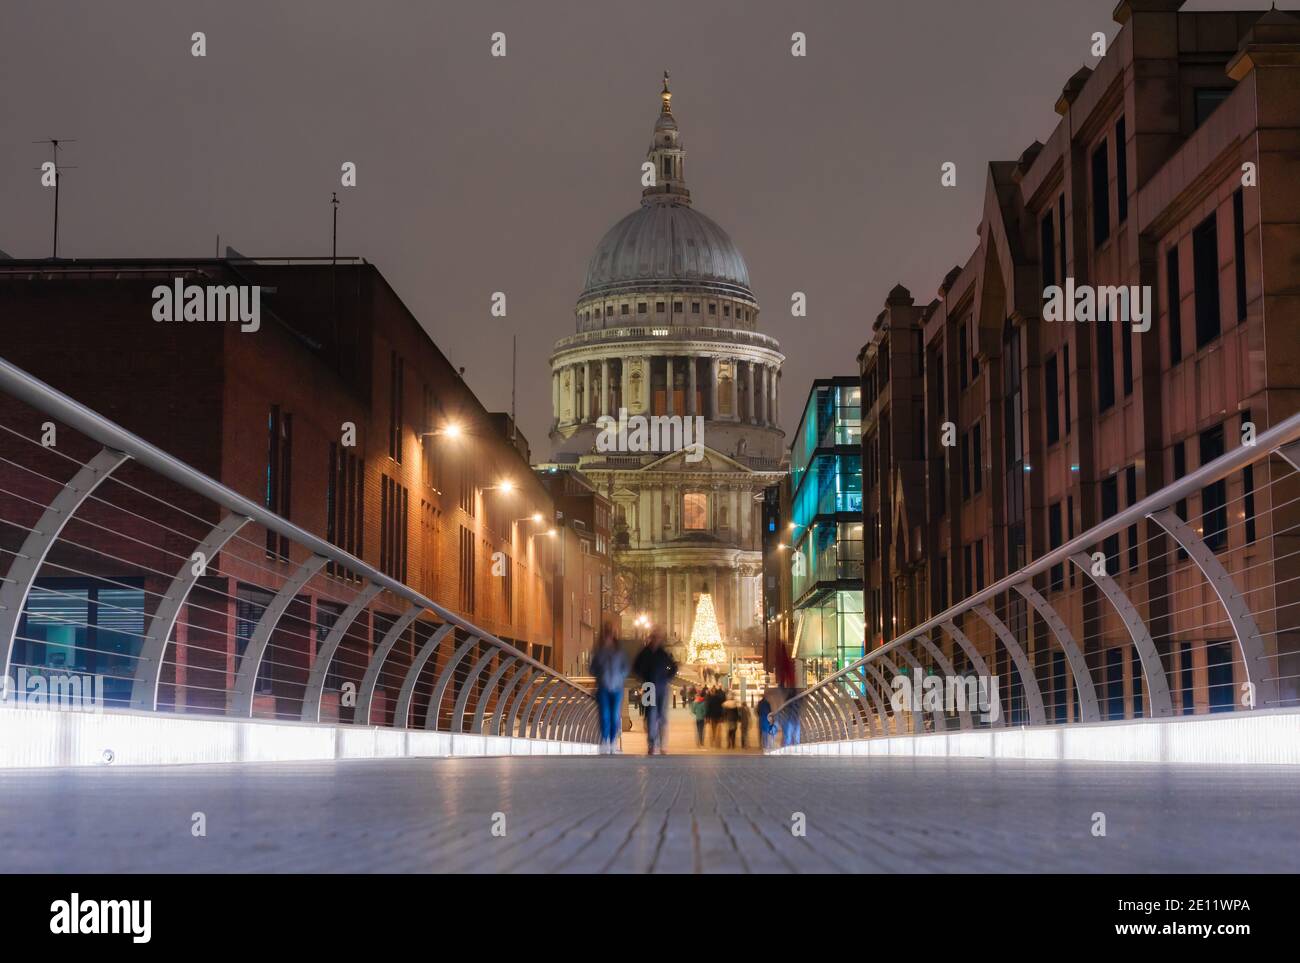 View from the Millennium Bridge of the Saint Paul’s Cathedral in the city of London illuminated at dusk Stock Photo